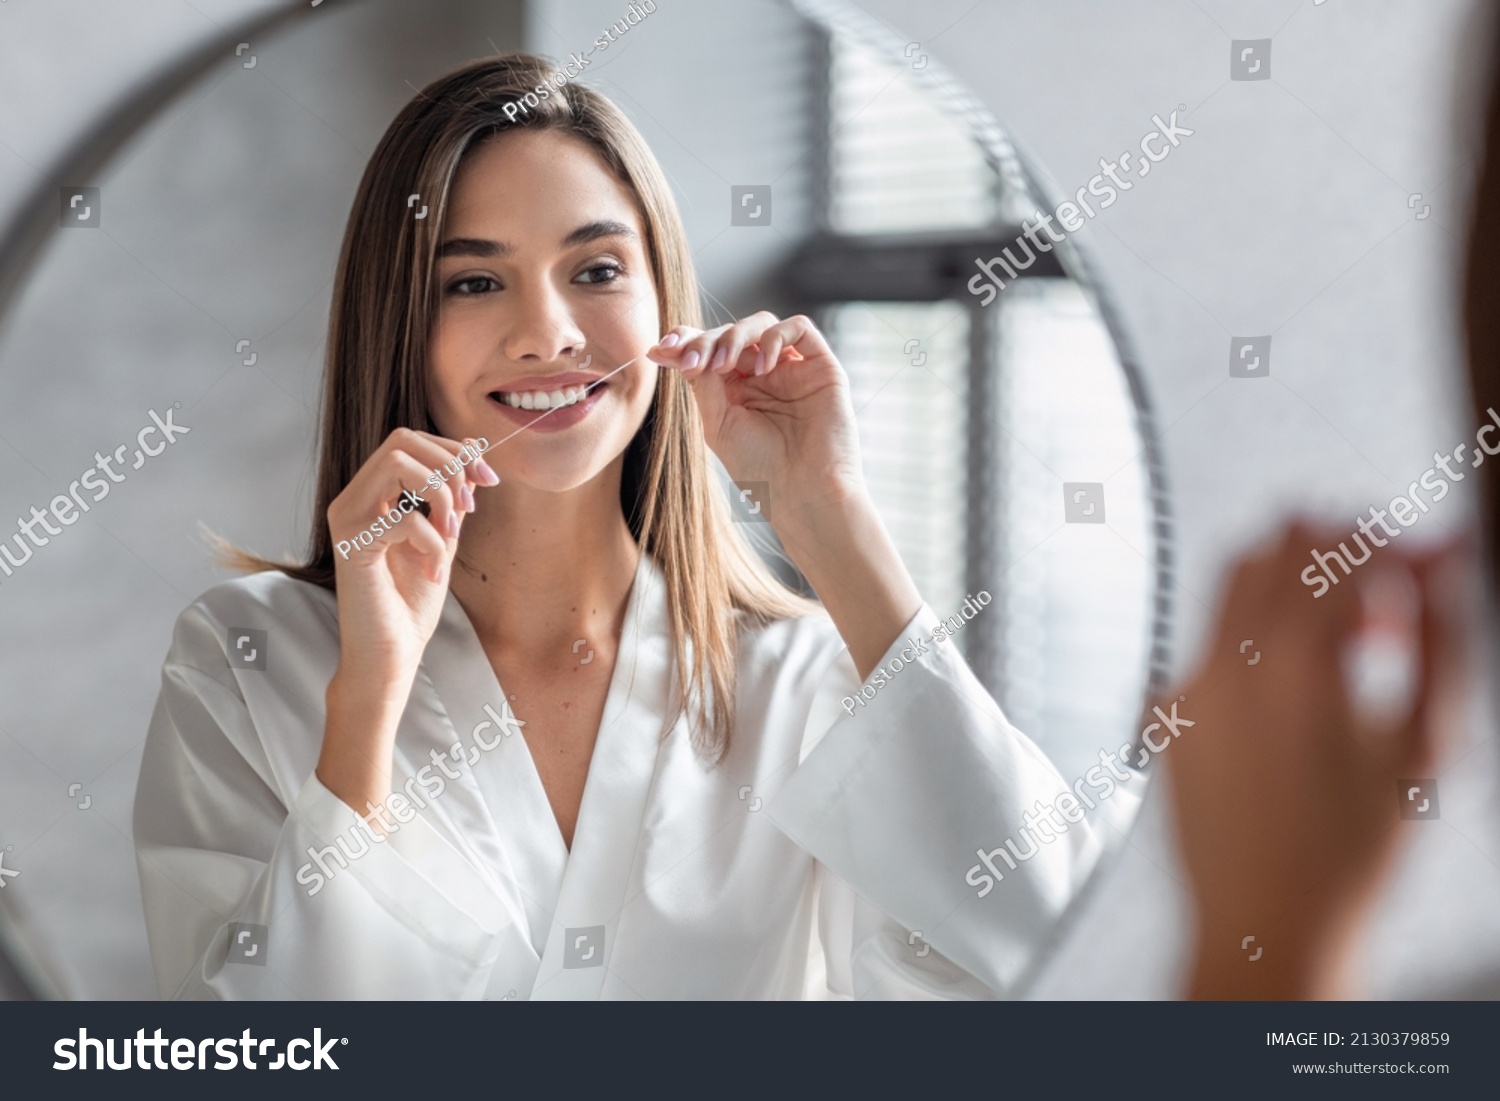 Oral Care. Smiling Young Female Using Dental Floss Near Mirror In Bathroom, Beautiful Millennial Woman Cleansing Teeth, Making Daily Hygiene Routine At Home, Seletive Focus On Reflection #2130379859